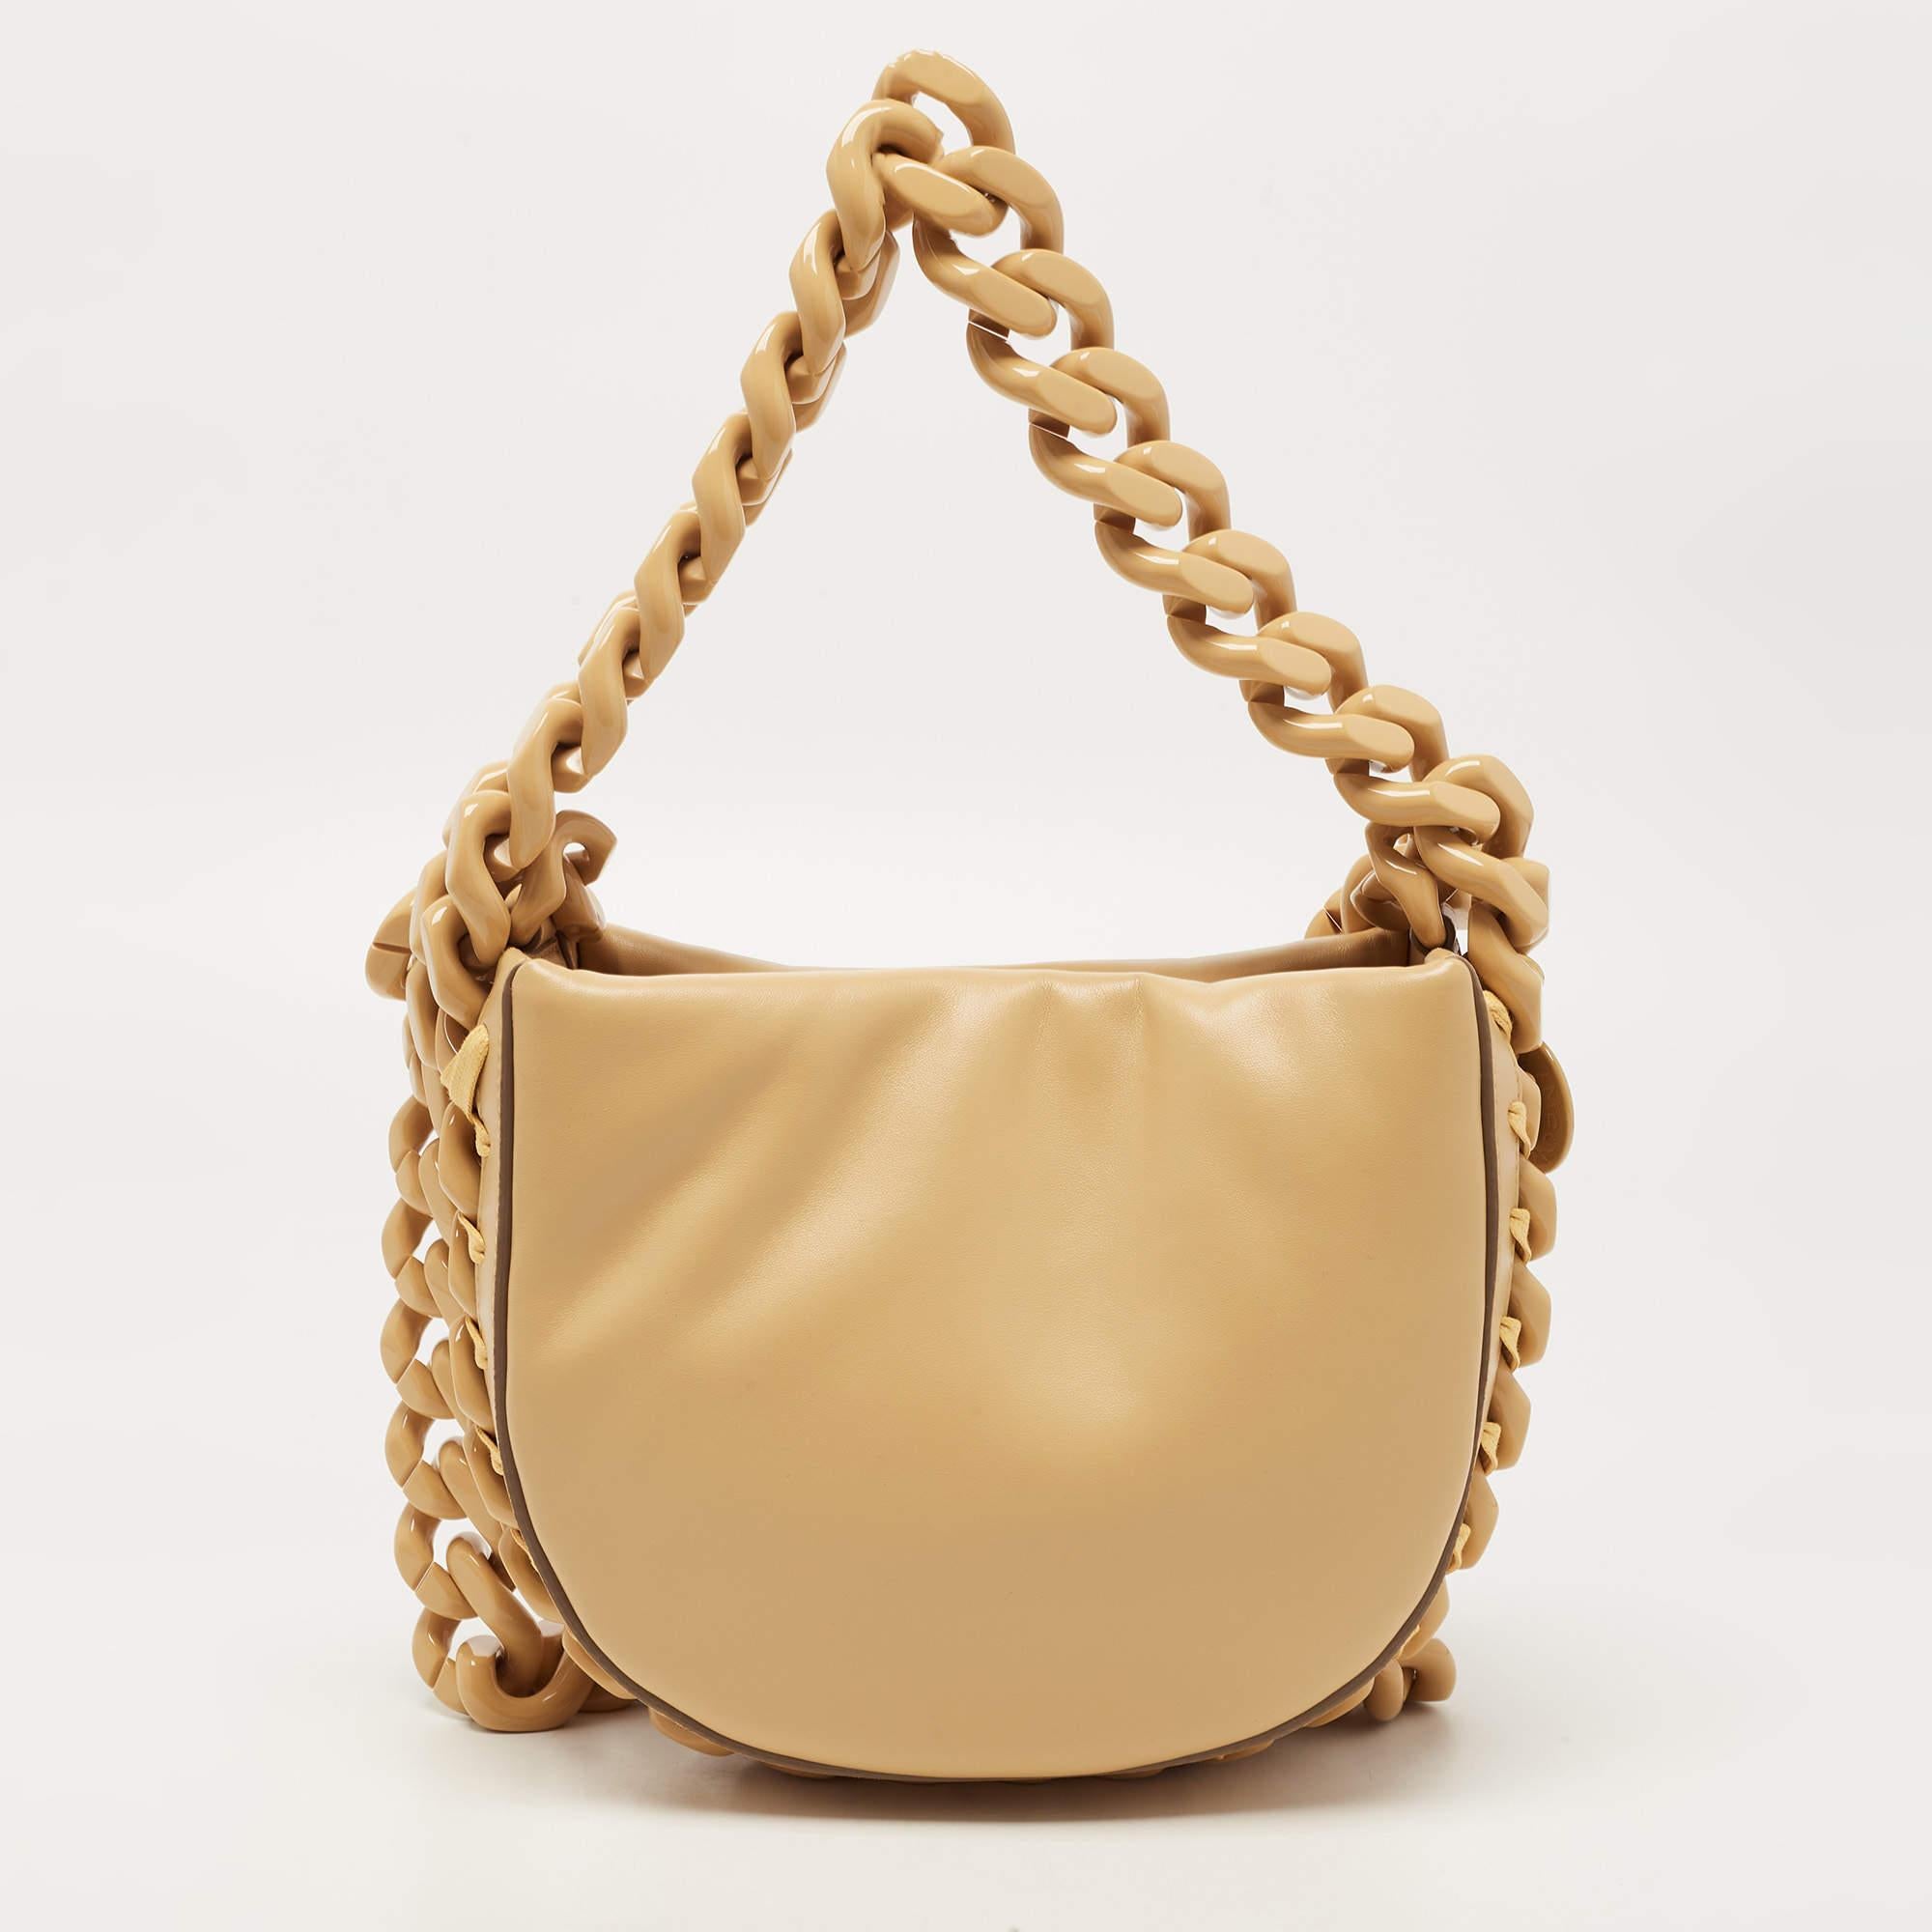 The Stella McCartney Frayme Bag is a stylish and versatile accessory designed for the fashion-forward individual. With its crescent silhouette and high-quality faux leather construction, this bag effortlessly combines luxury and sustainability.